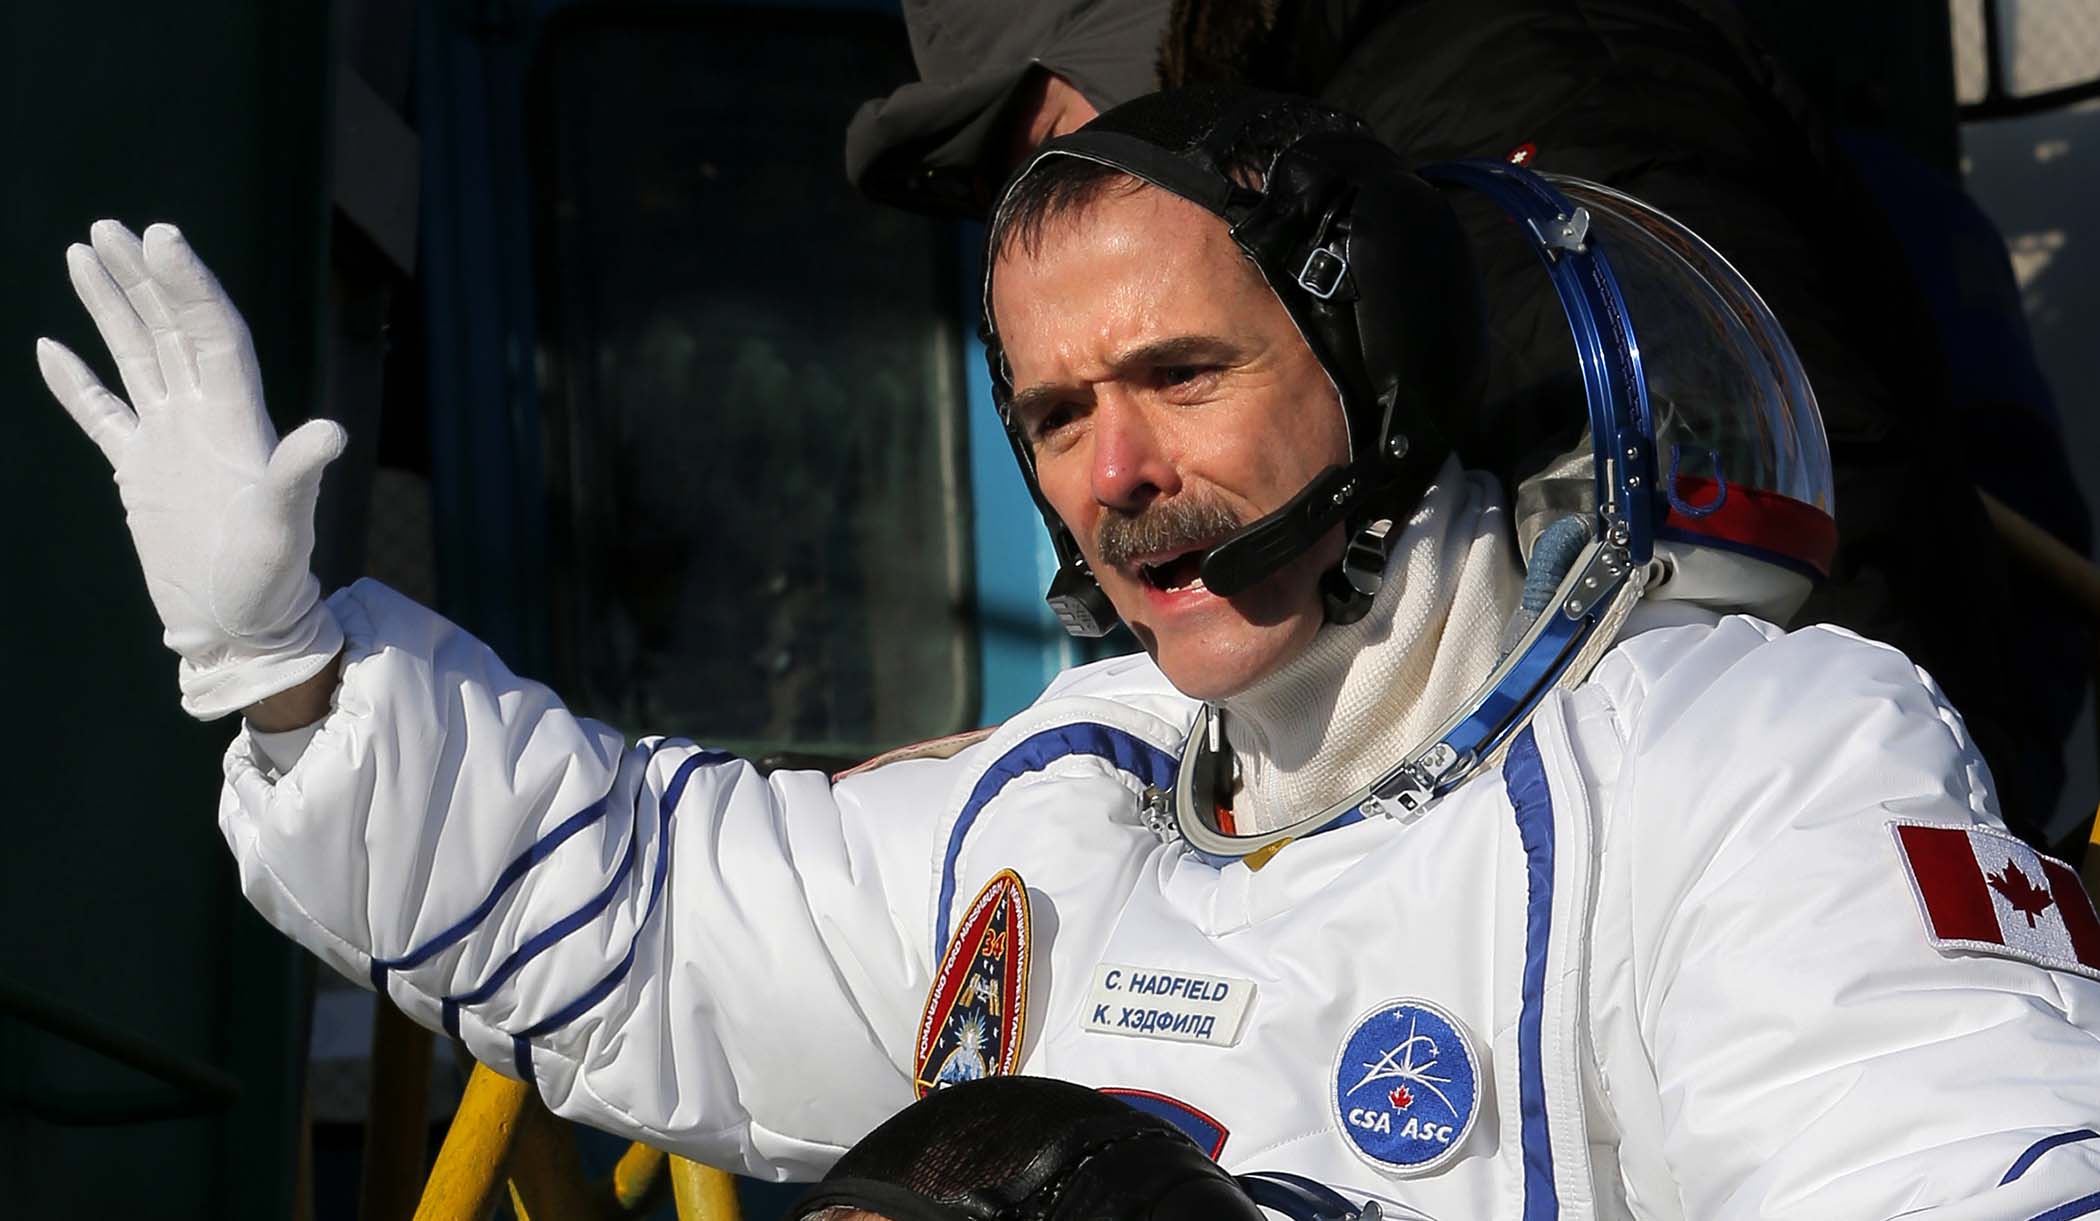 Canadian astronaut Chris Hadfield, a crew member of the mission to the International Space Station, gestures prior to the launch of the Soyuz-FG rocket at the Russian leased Baikonur cosmodrome inKazakhstan, December 19, 2012. (Dmitry Lovetsky/Associated Press) Provided image